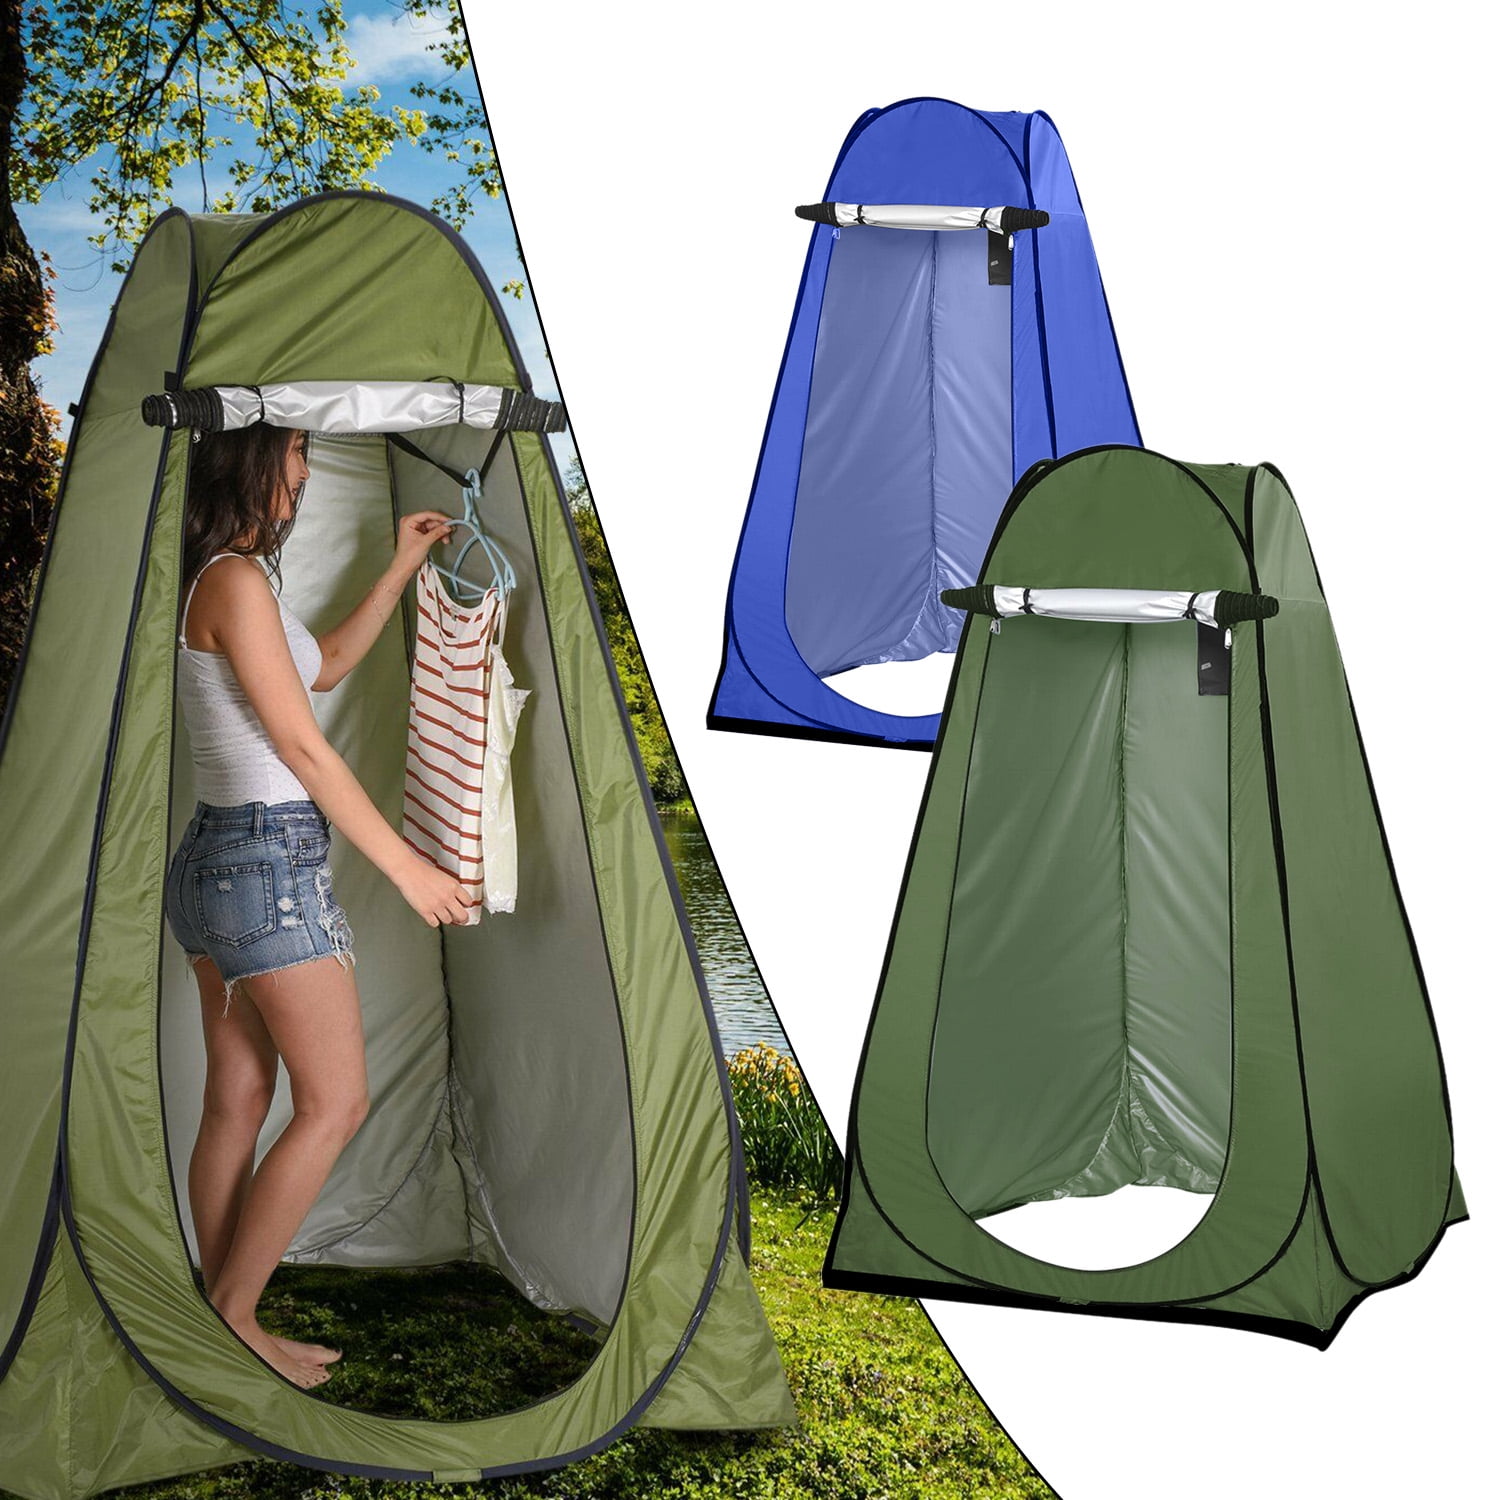 US Large Camping Shower Shelter Pop Up Tent Outdoor Room Privacy Portable 